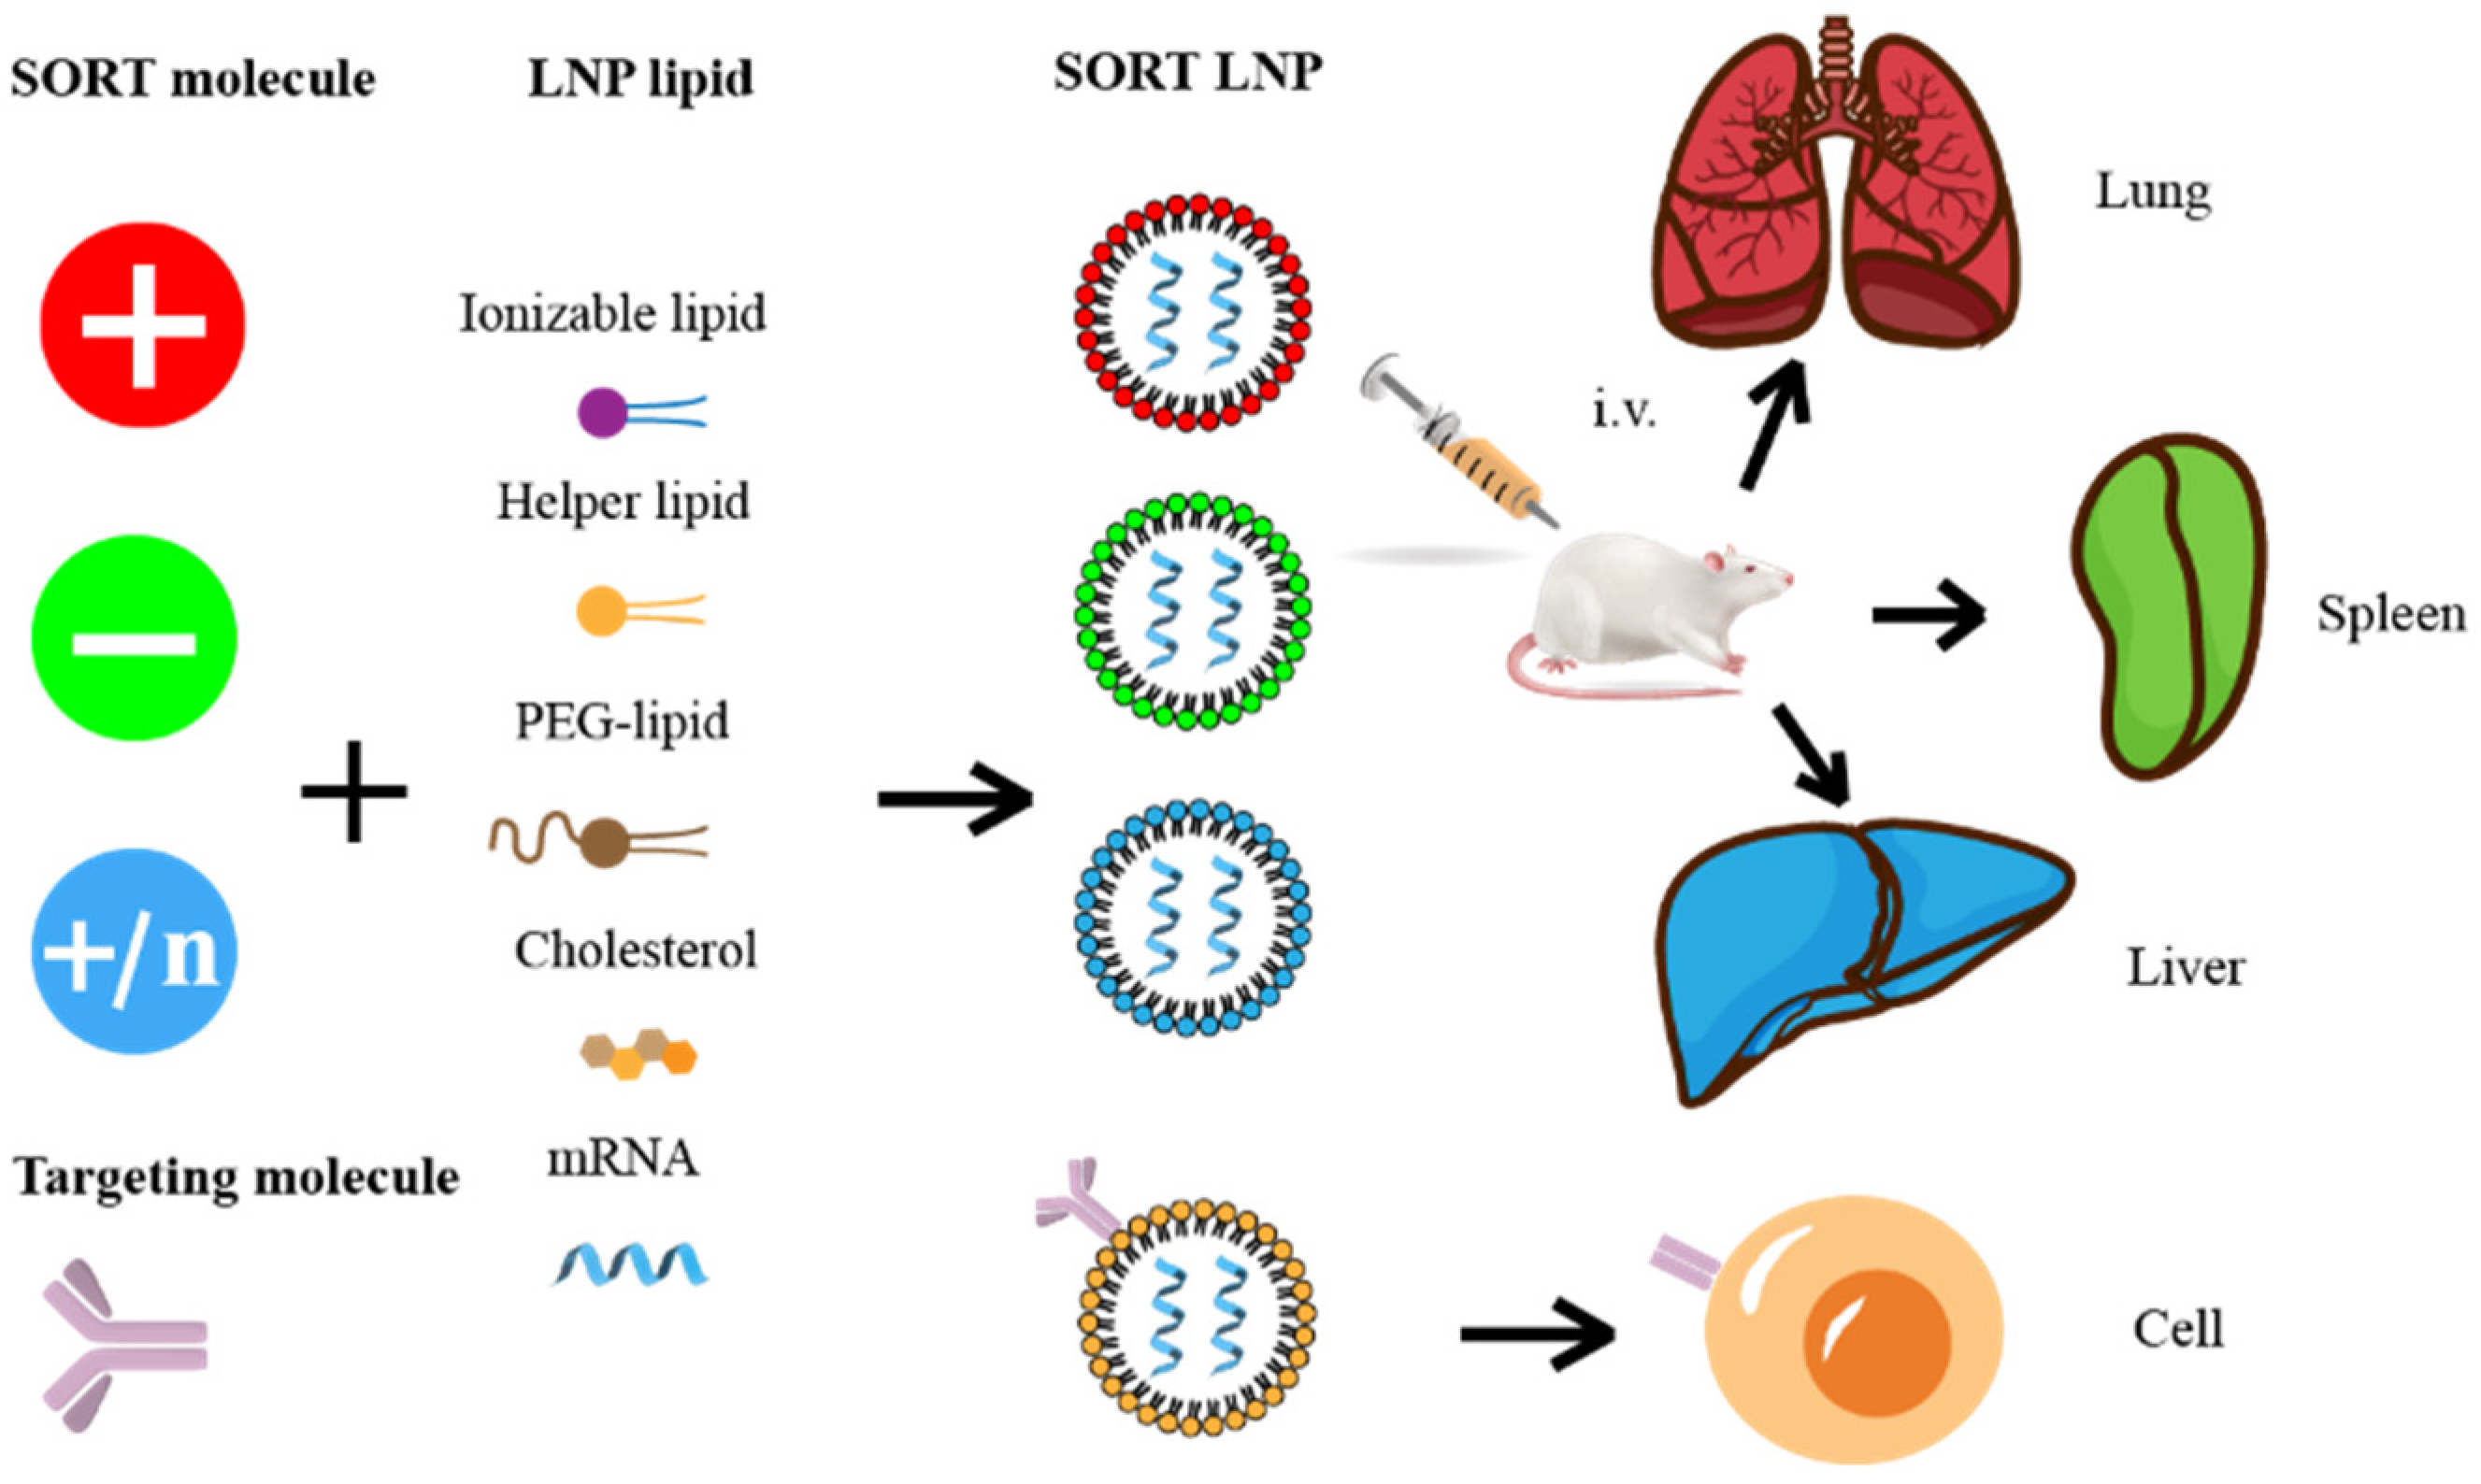 Drug Delivery Products :: Phospholipids and Lipids for LNP and